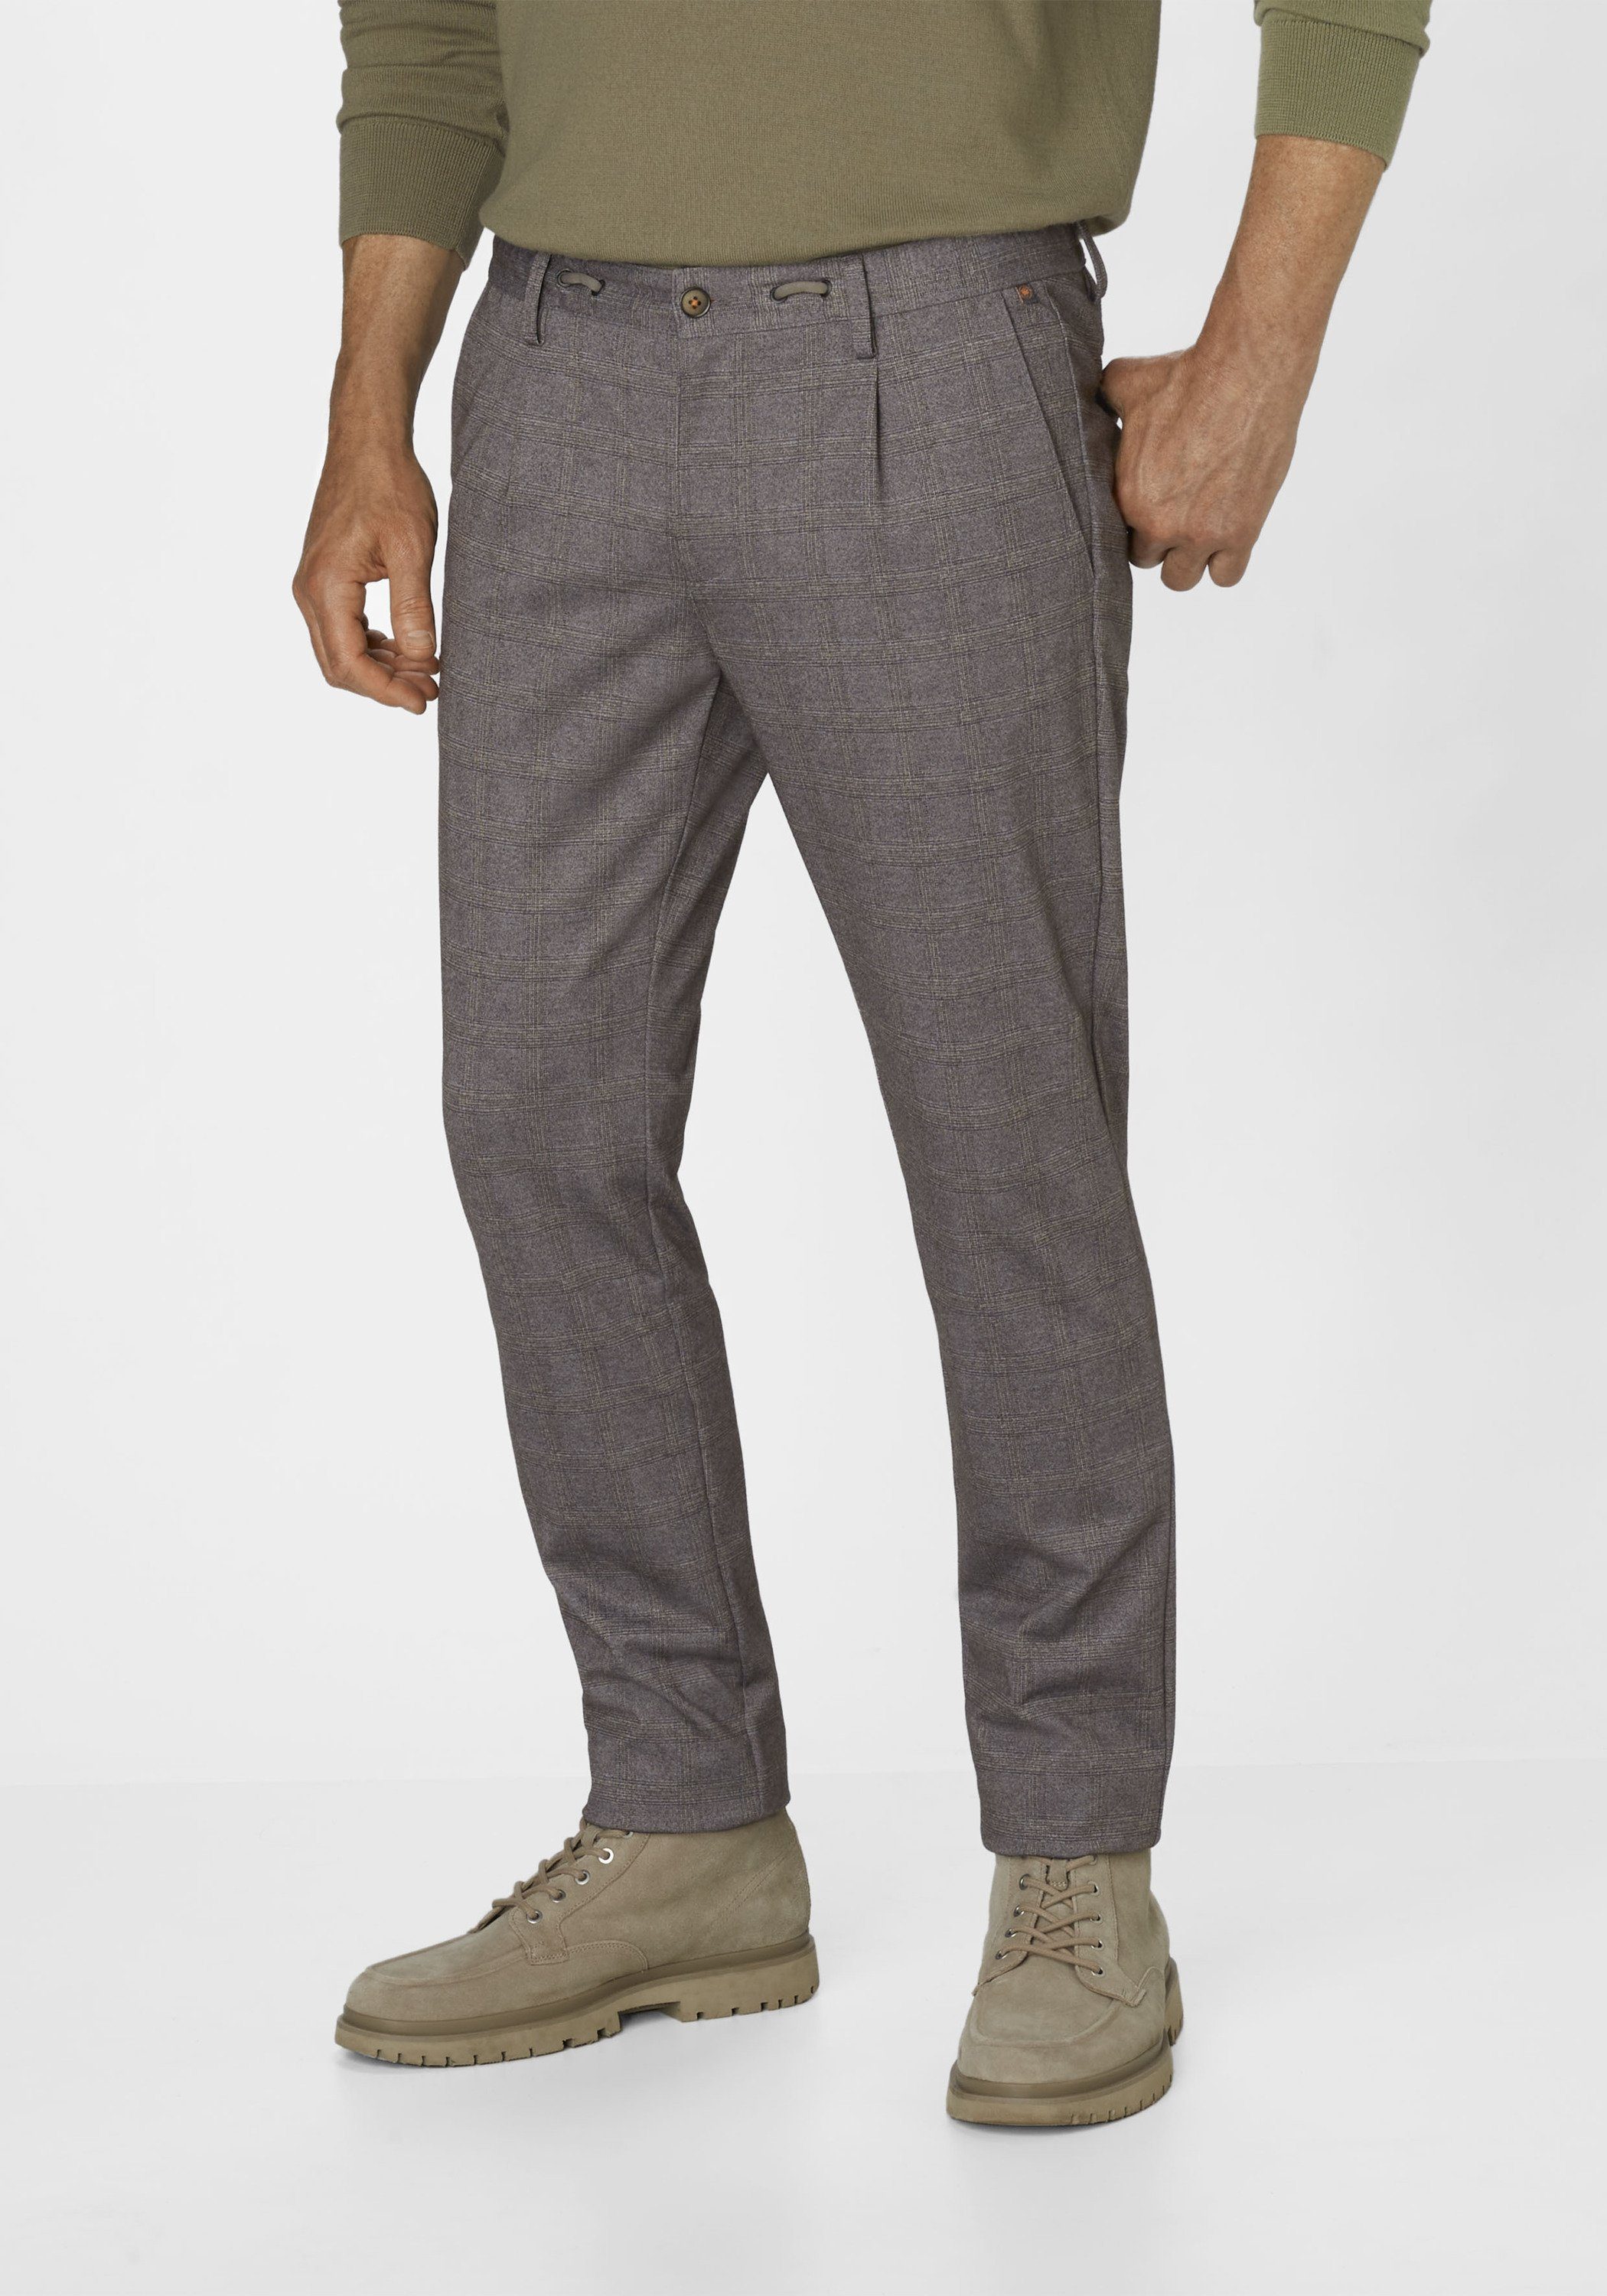 COLWOOD check Chinohose grey Stoffhose Slim-Fit mit Jogg Redpoint Stretch